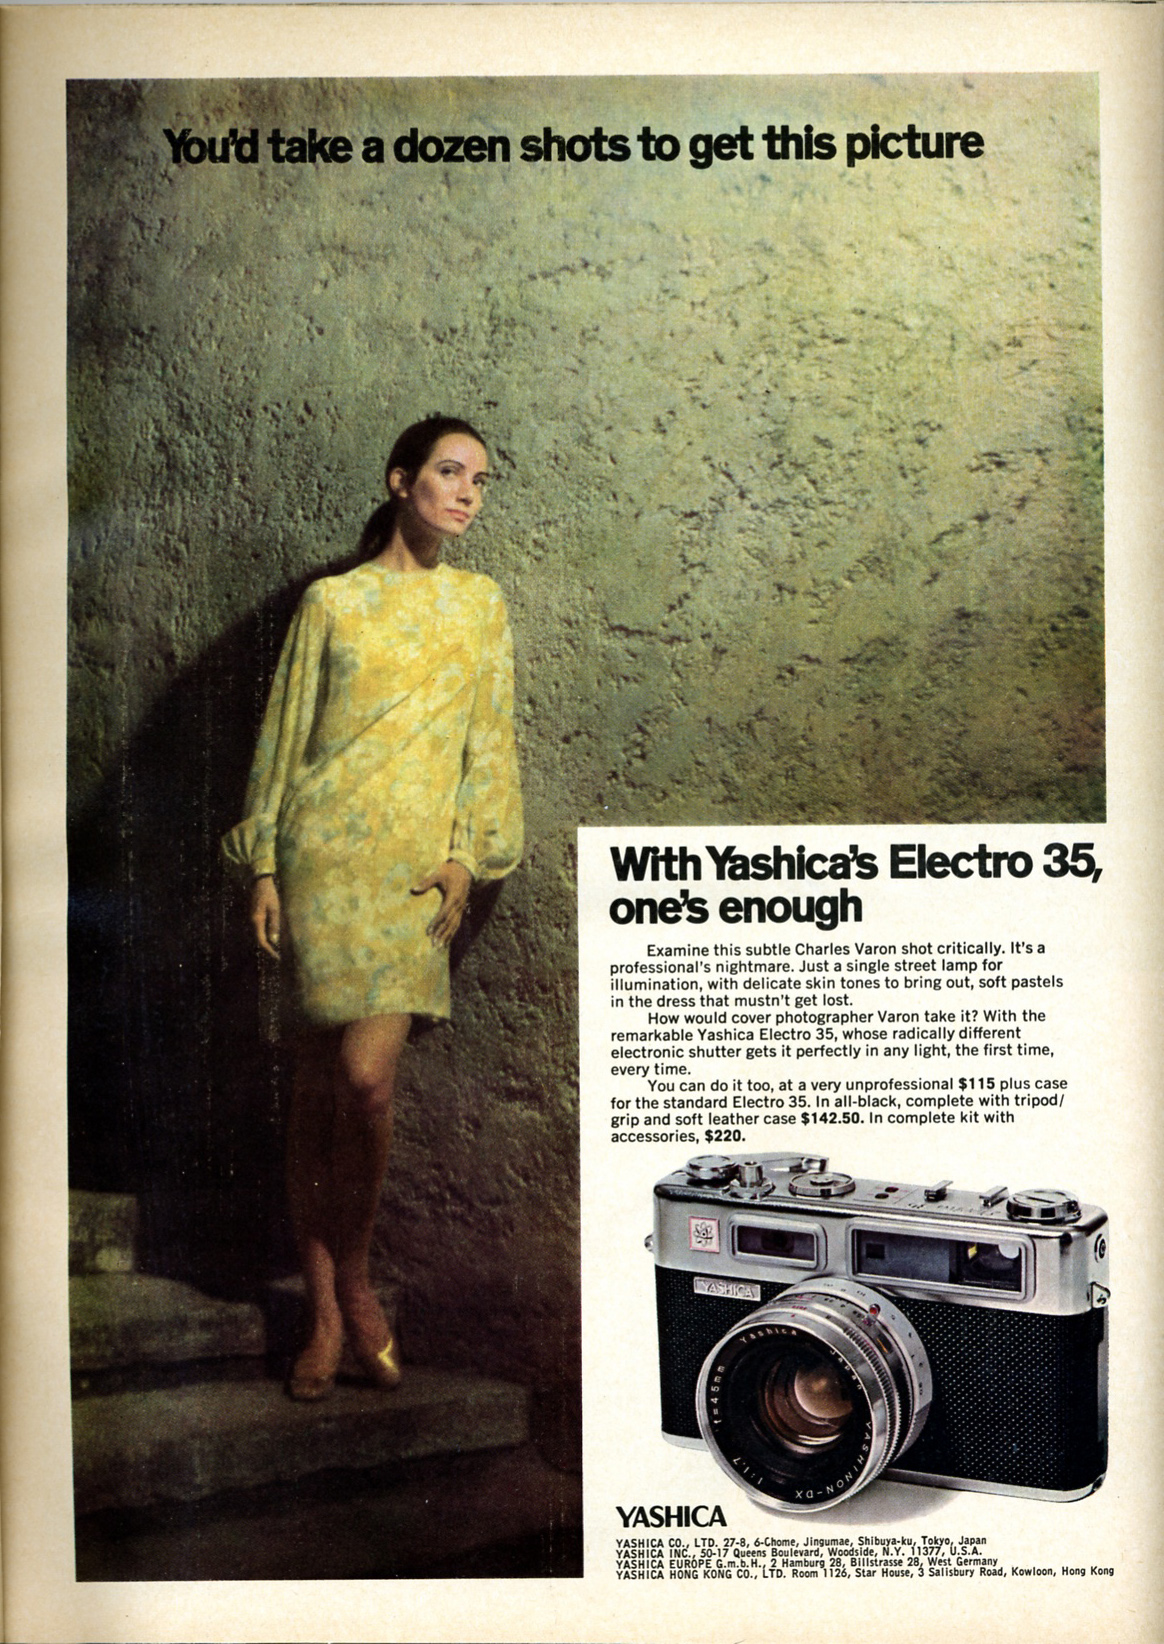 an ad from the sears company showing a model in a yellow dress and matching camera